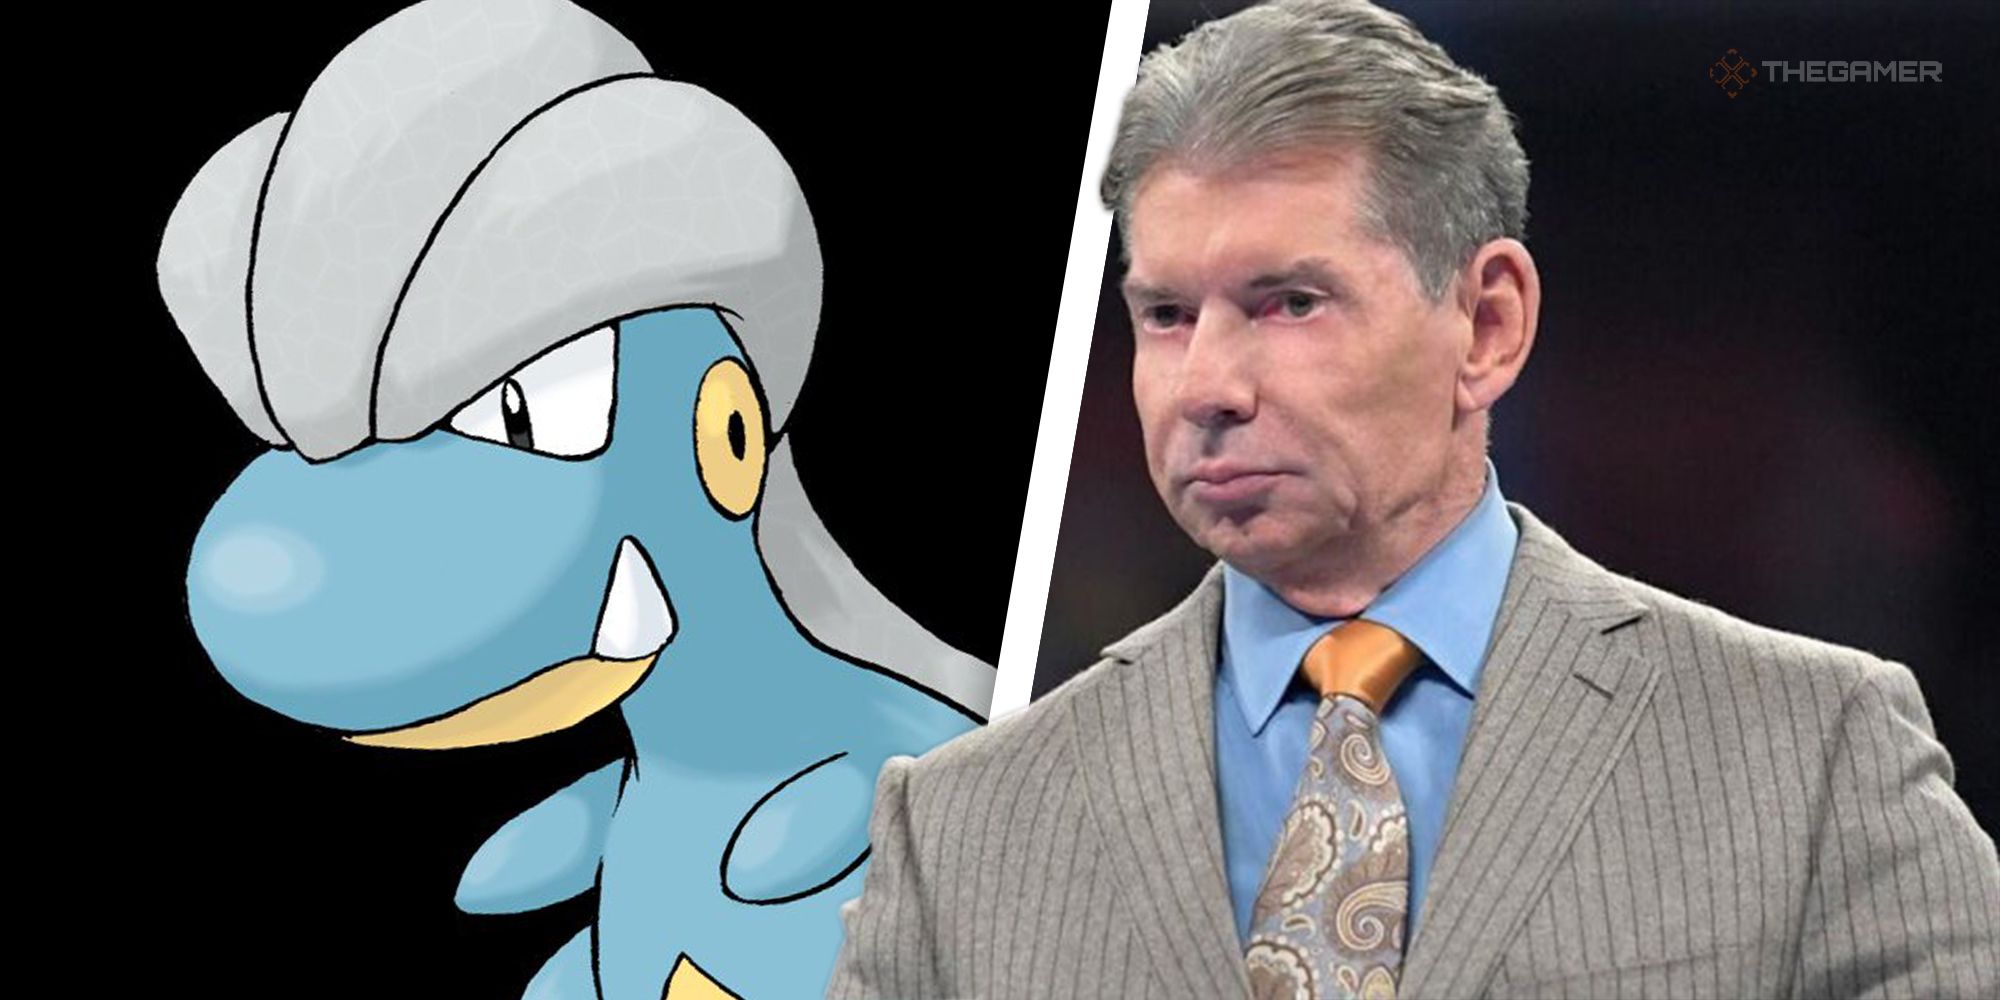 Heres 30 Wrestlers As Pokemon For The Royal Rumble (27)